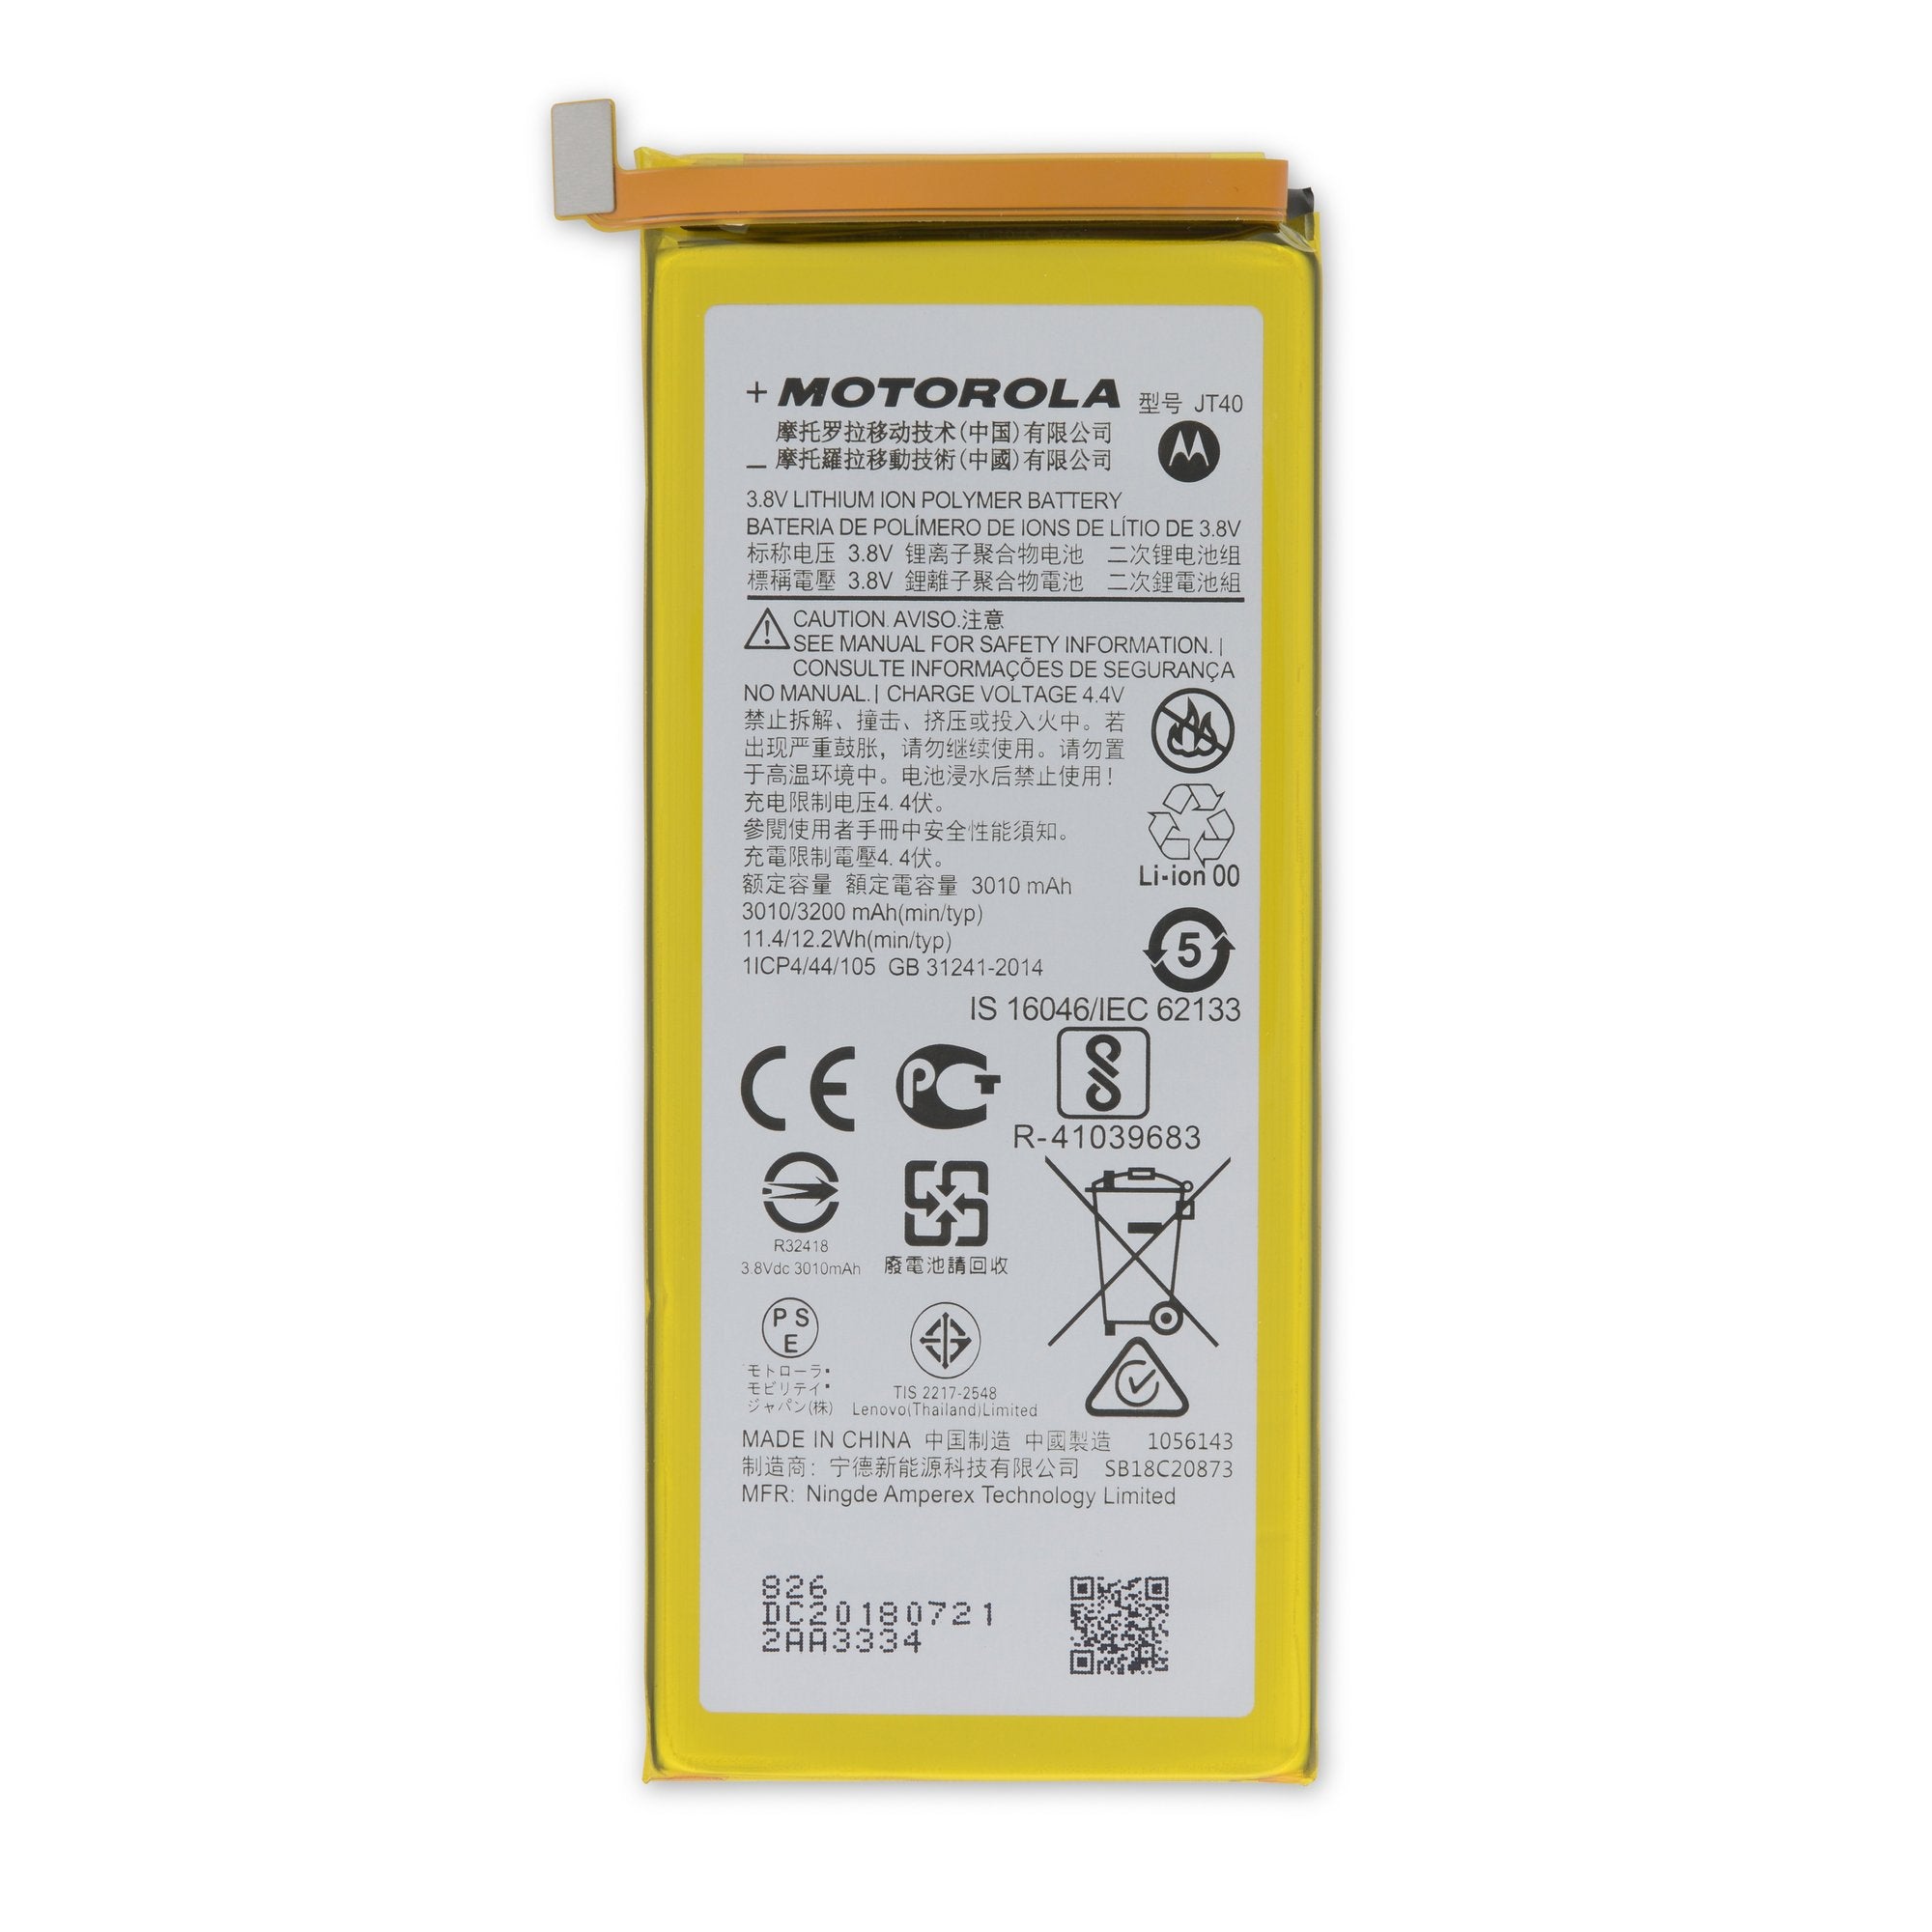 Moto G6 Plus Battery - Genuine New Part Only